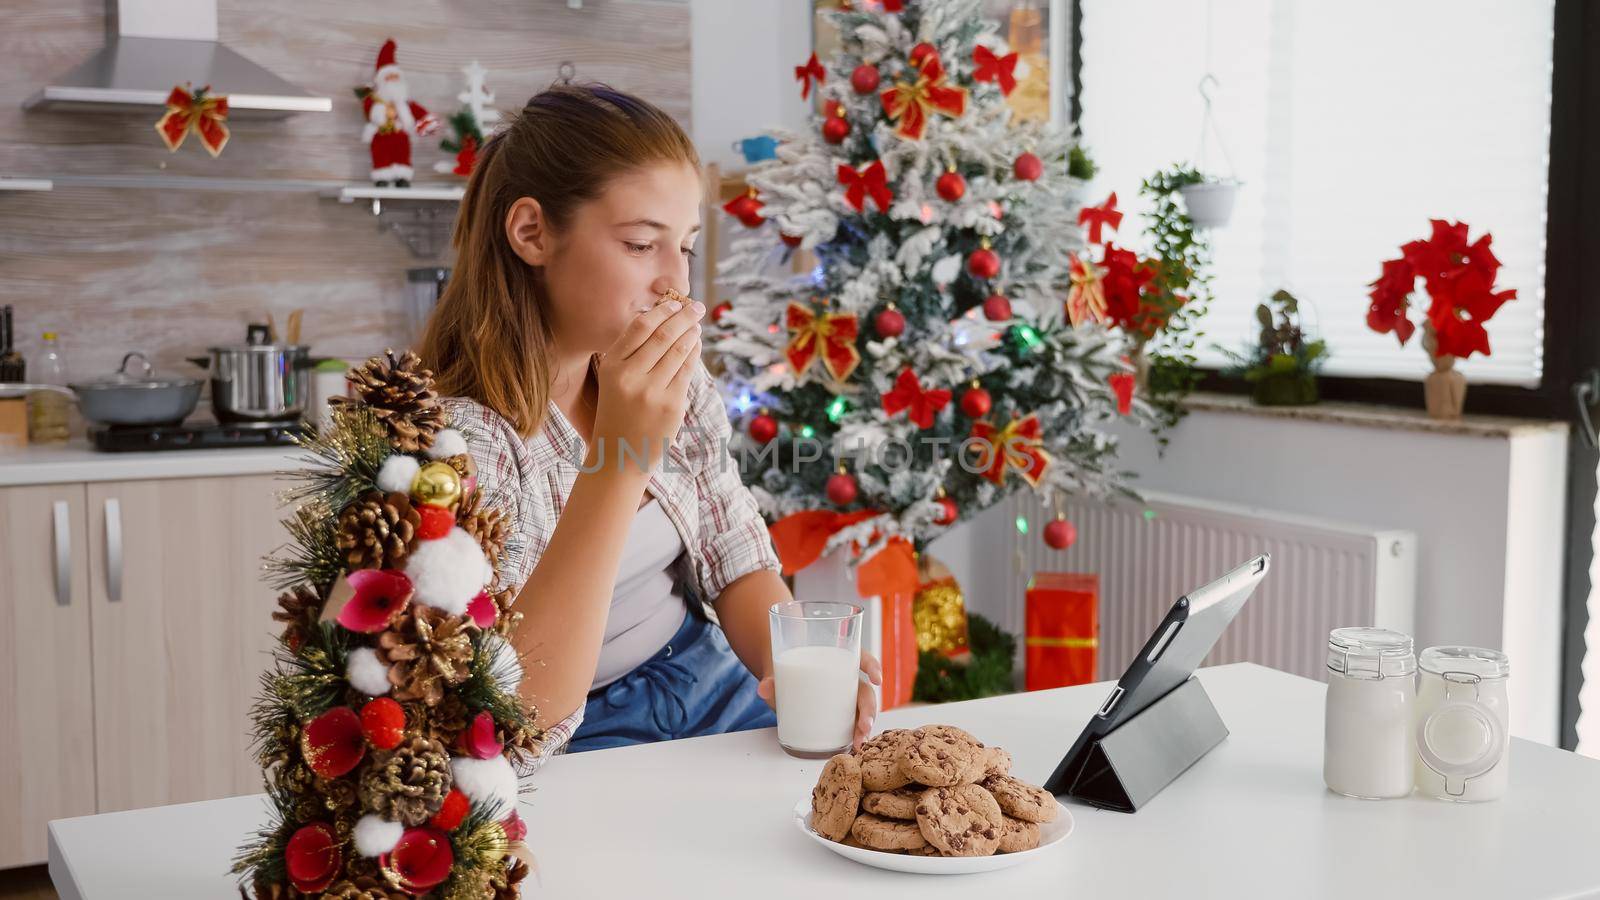 Happy child sitting at table in decorated kitchen watching xmas online video on tablet computer by DCStudio